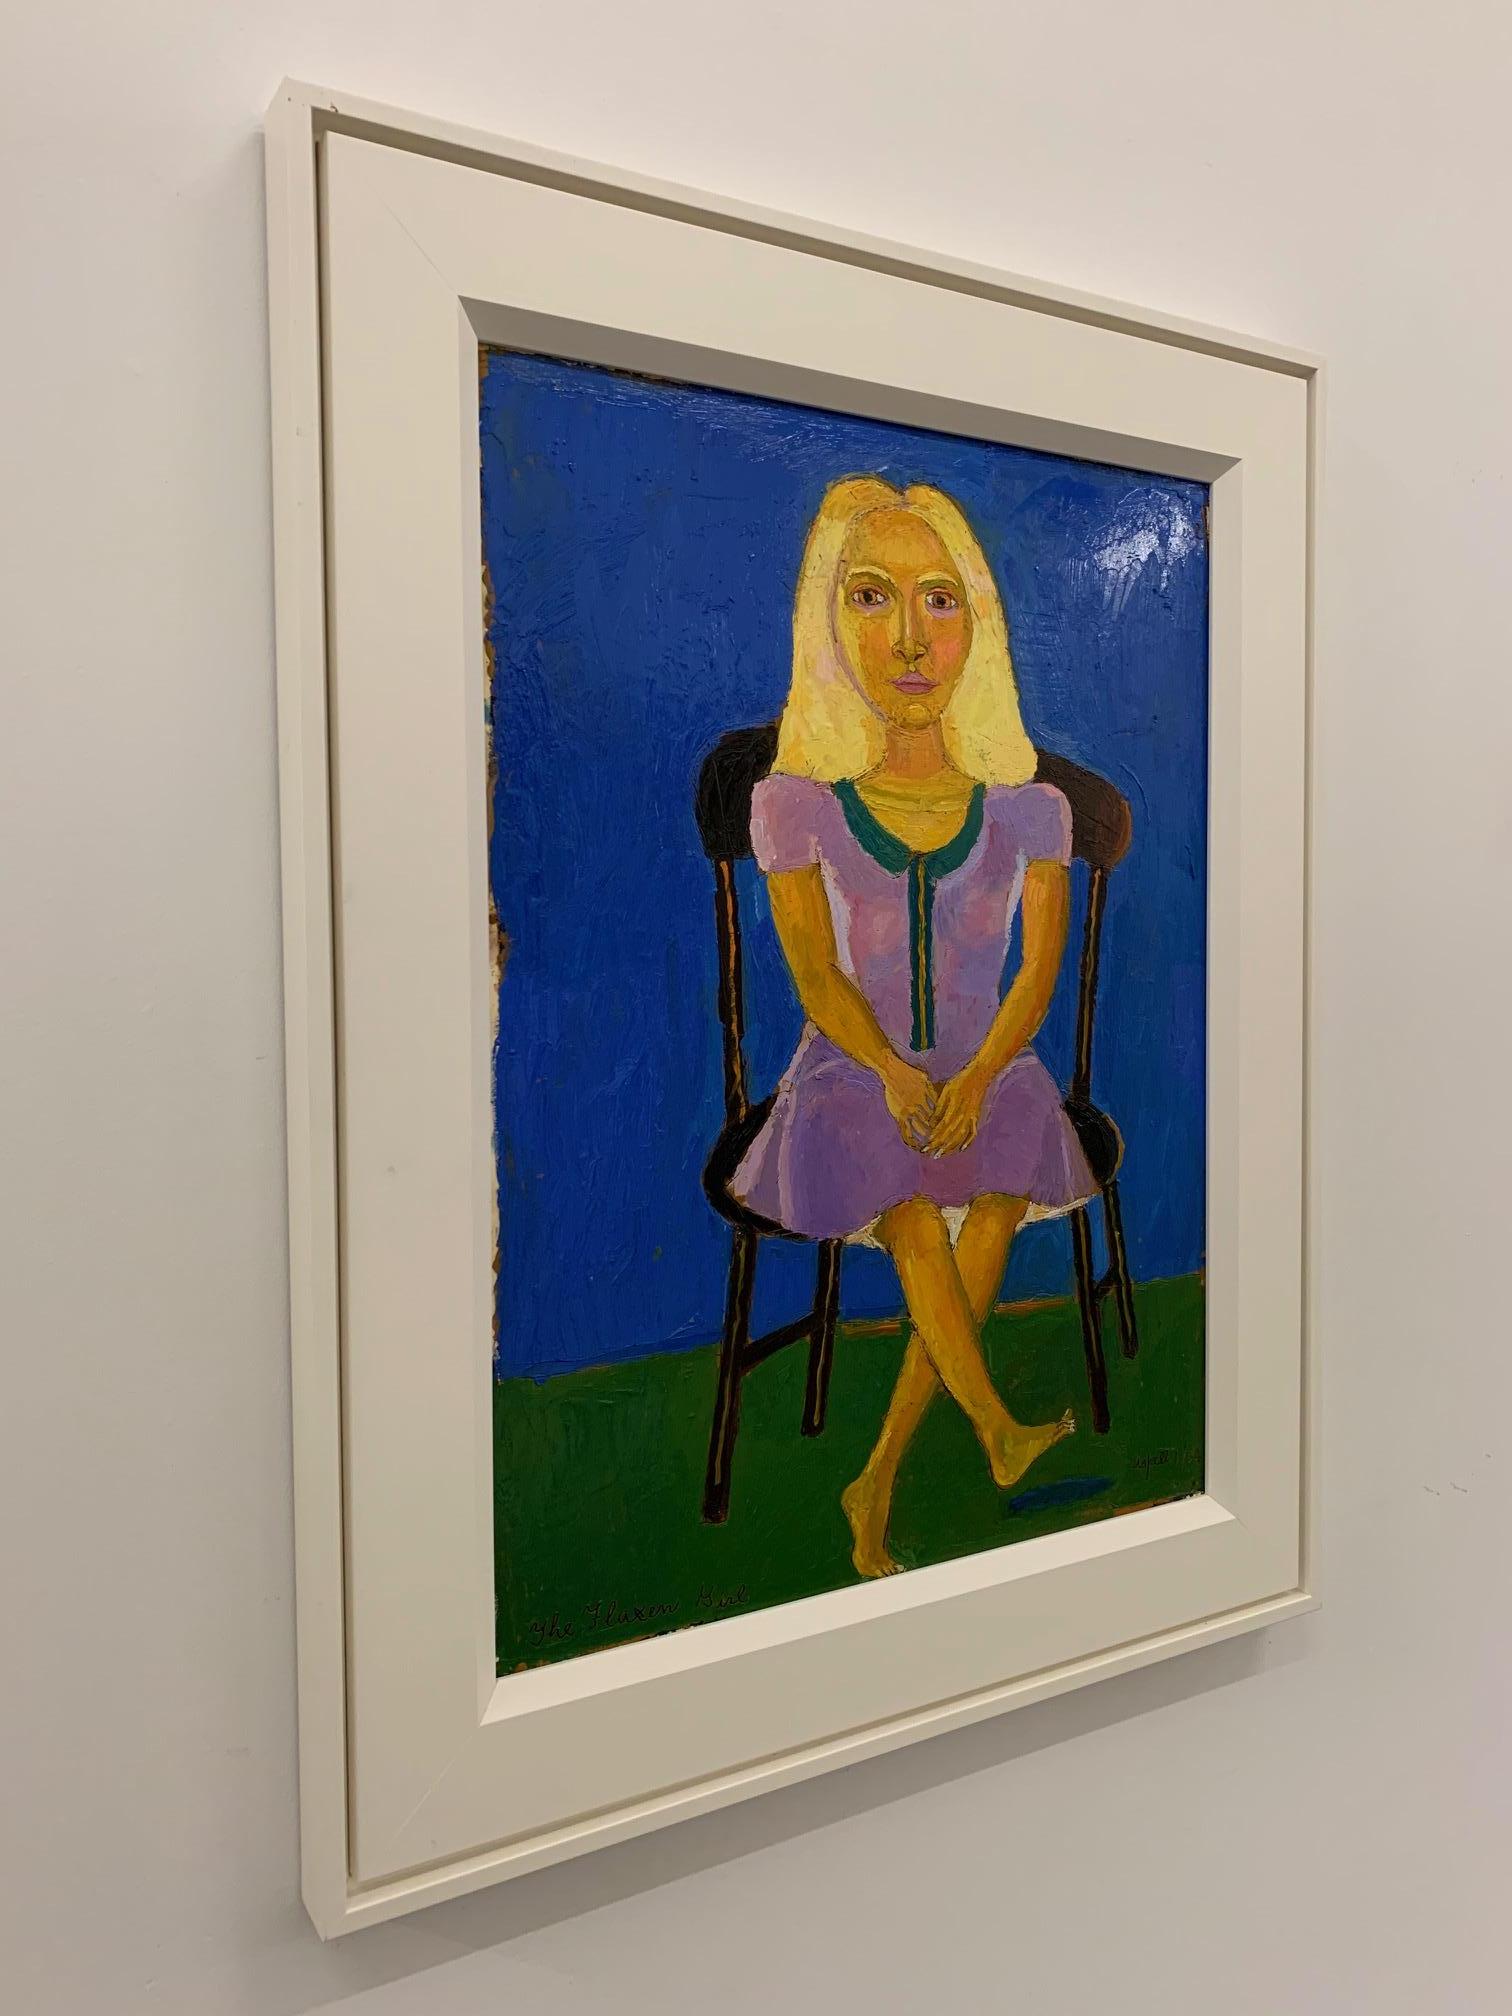 This contemporary, figurative, portrait of a young girl sitting quietly on a chair looking back at the viewer. 

A passionate and devoted artist, Aspell was born in Vancouver in 1918 and passed in 2004, at the age of 86. He was educated at the